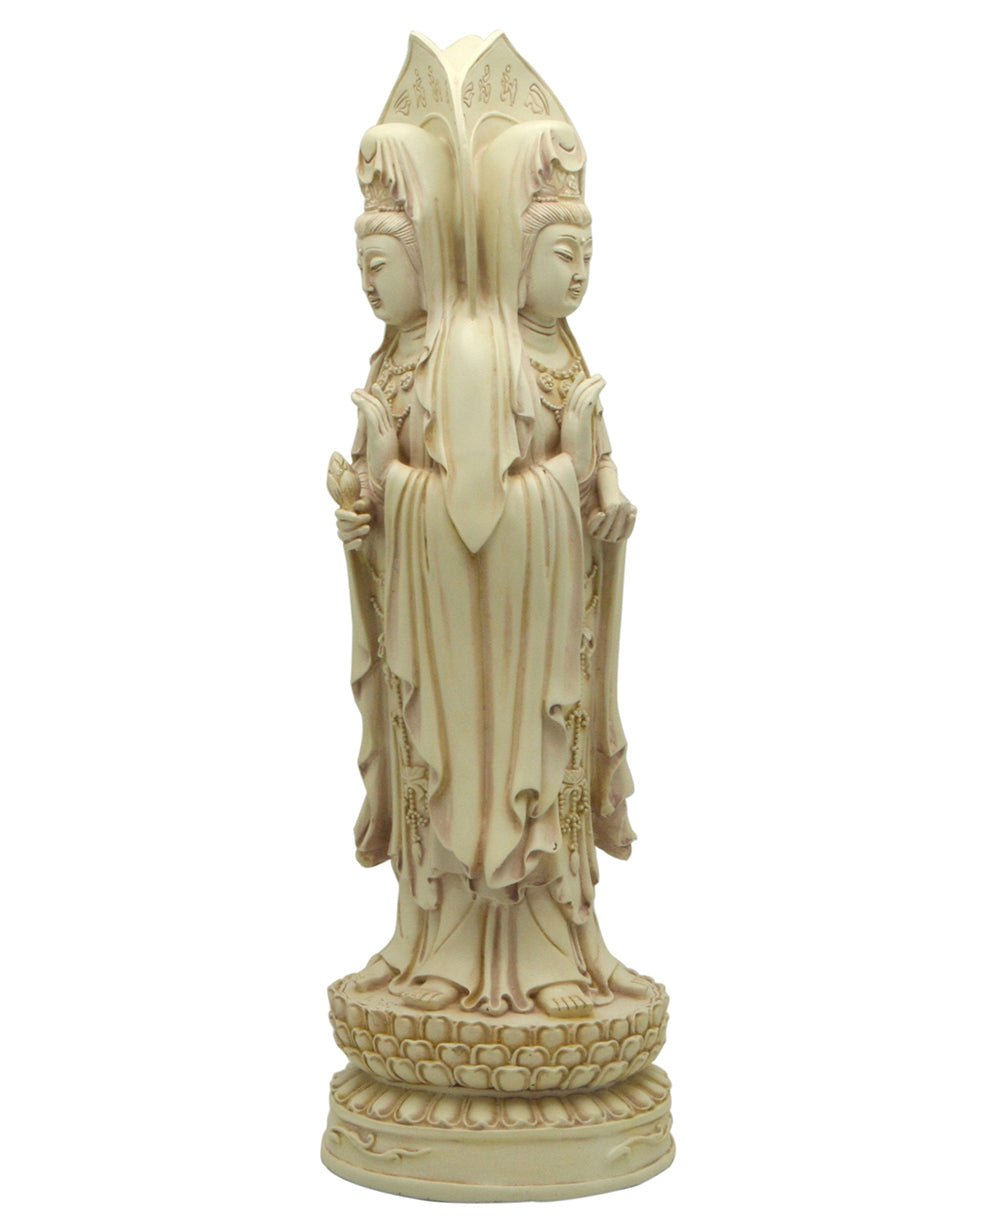 Kuan Yin Standing in Different Poses, Three Sided Statue - Sculptures & Statues